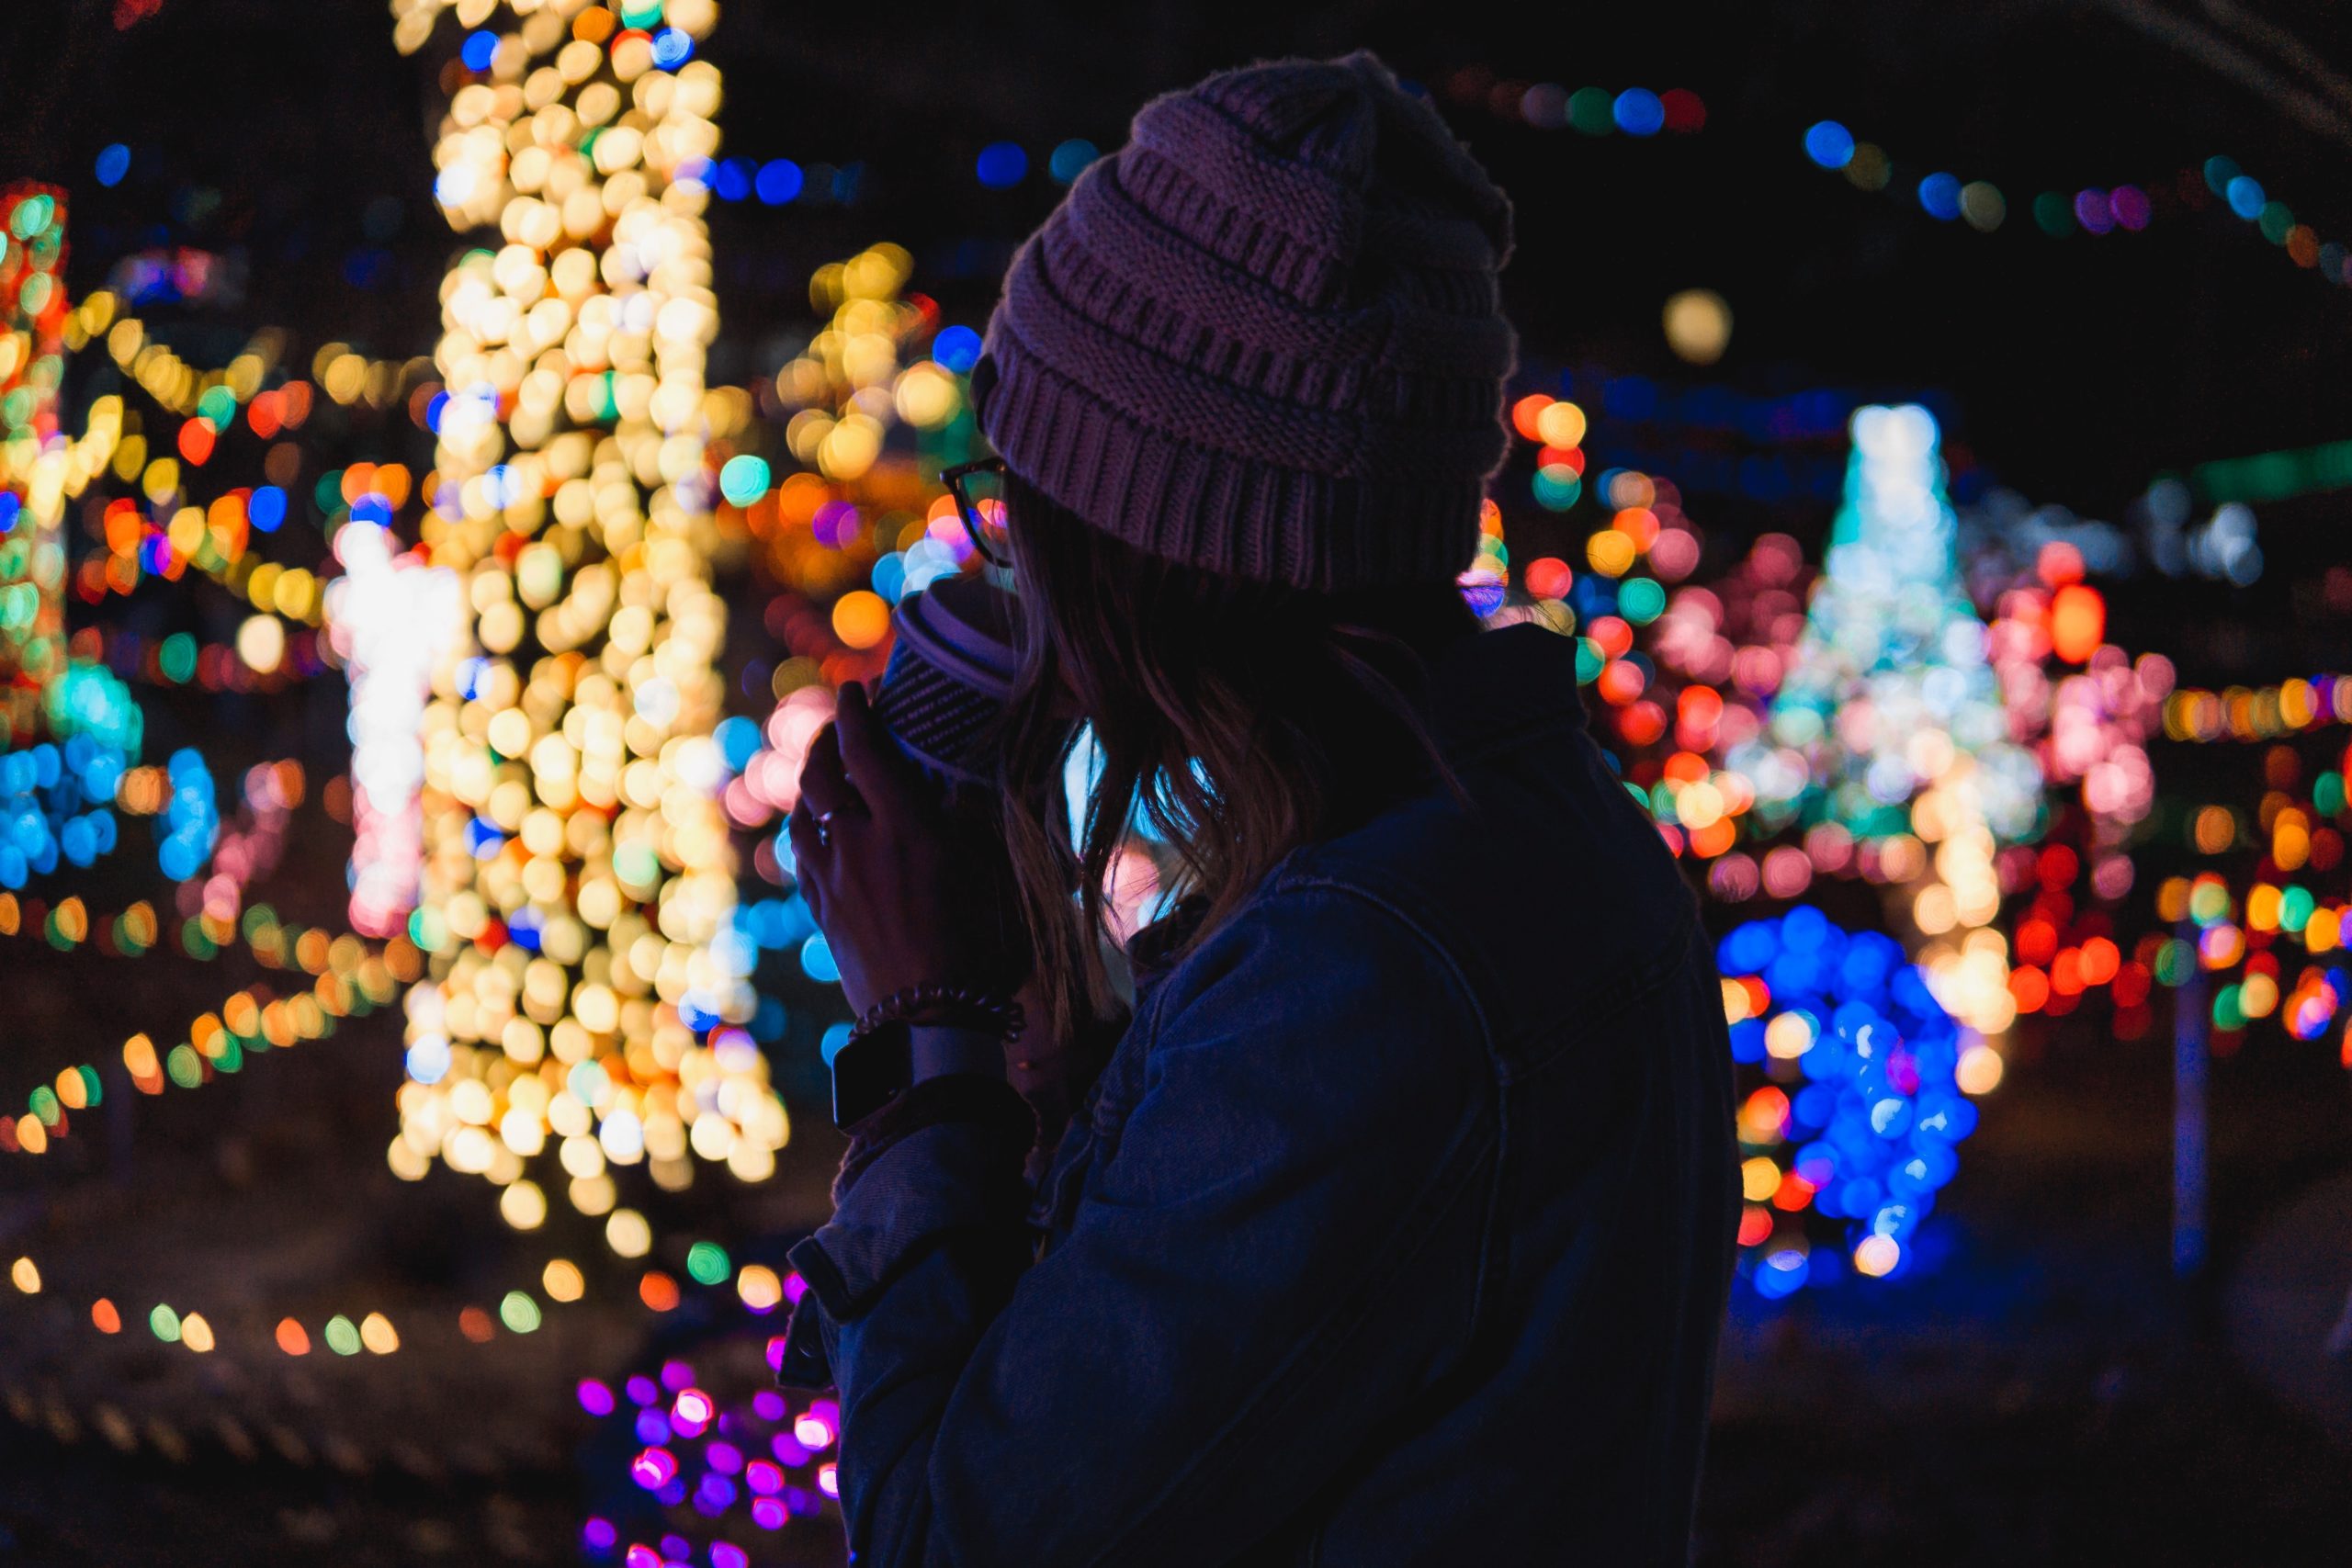 A woman sipping hot chocolate in a field of multicolor holiday lights.